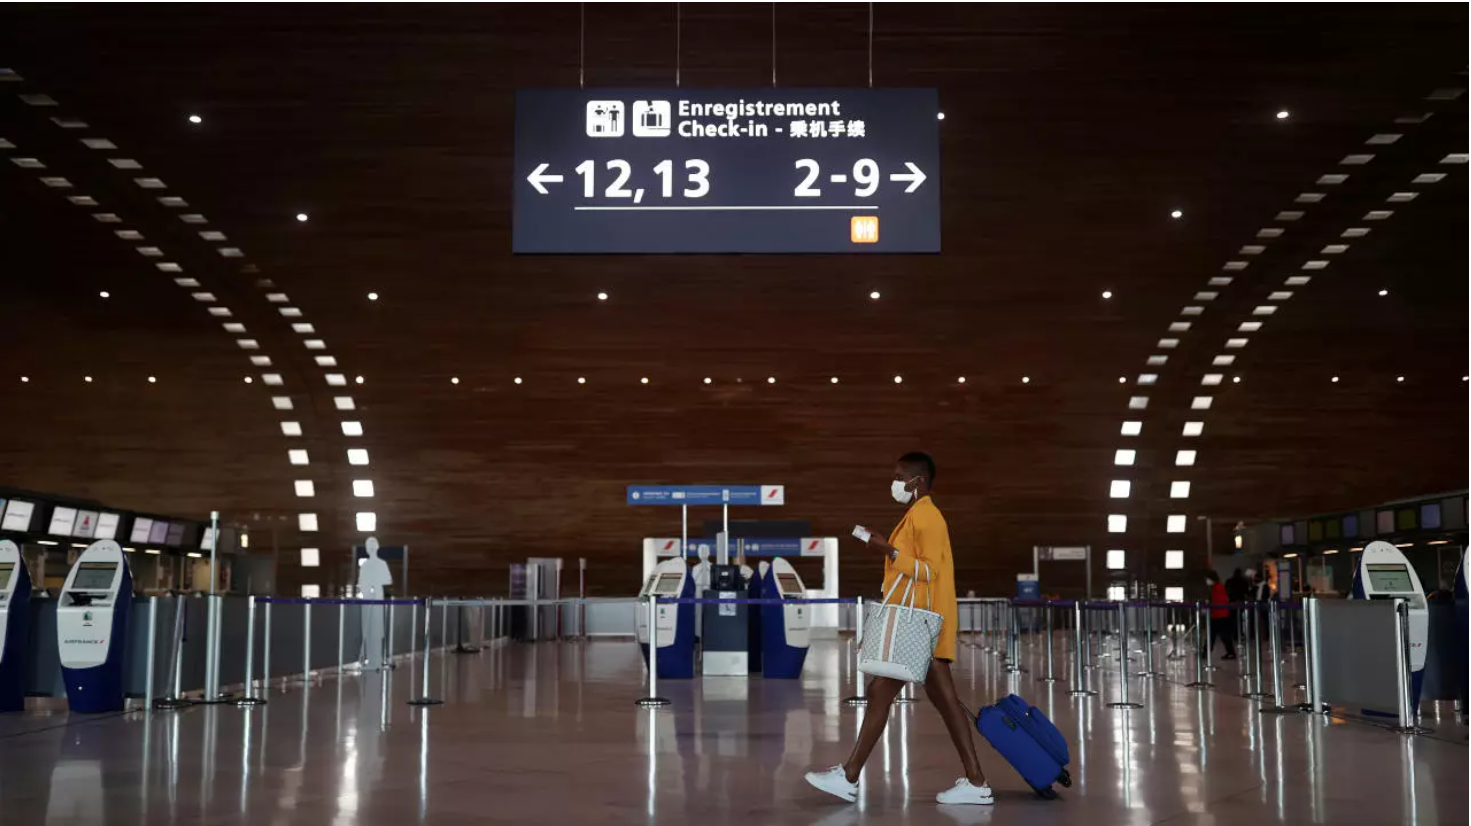 A woman makes her way in the departures area of the Terminal 2E at Charles-de-Gaulle airport north of Paris amid the ongoing Covid-19 pandemic on April 2, 2021. © Christian Hartmann, Reuters